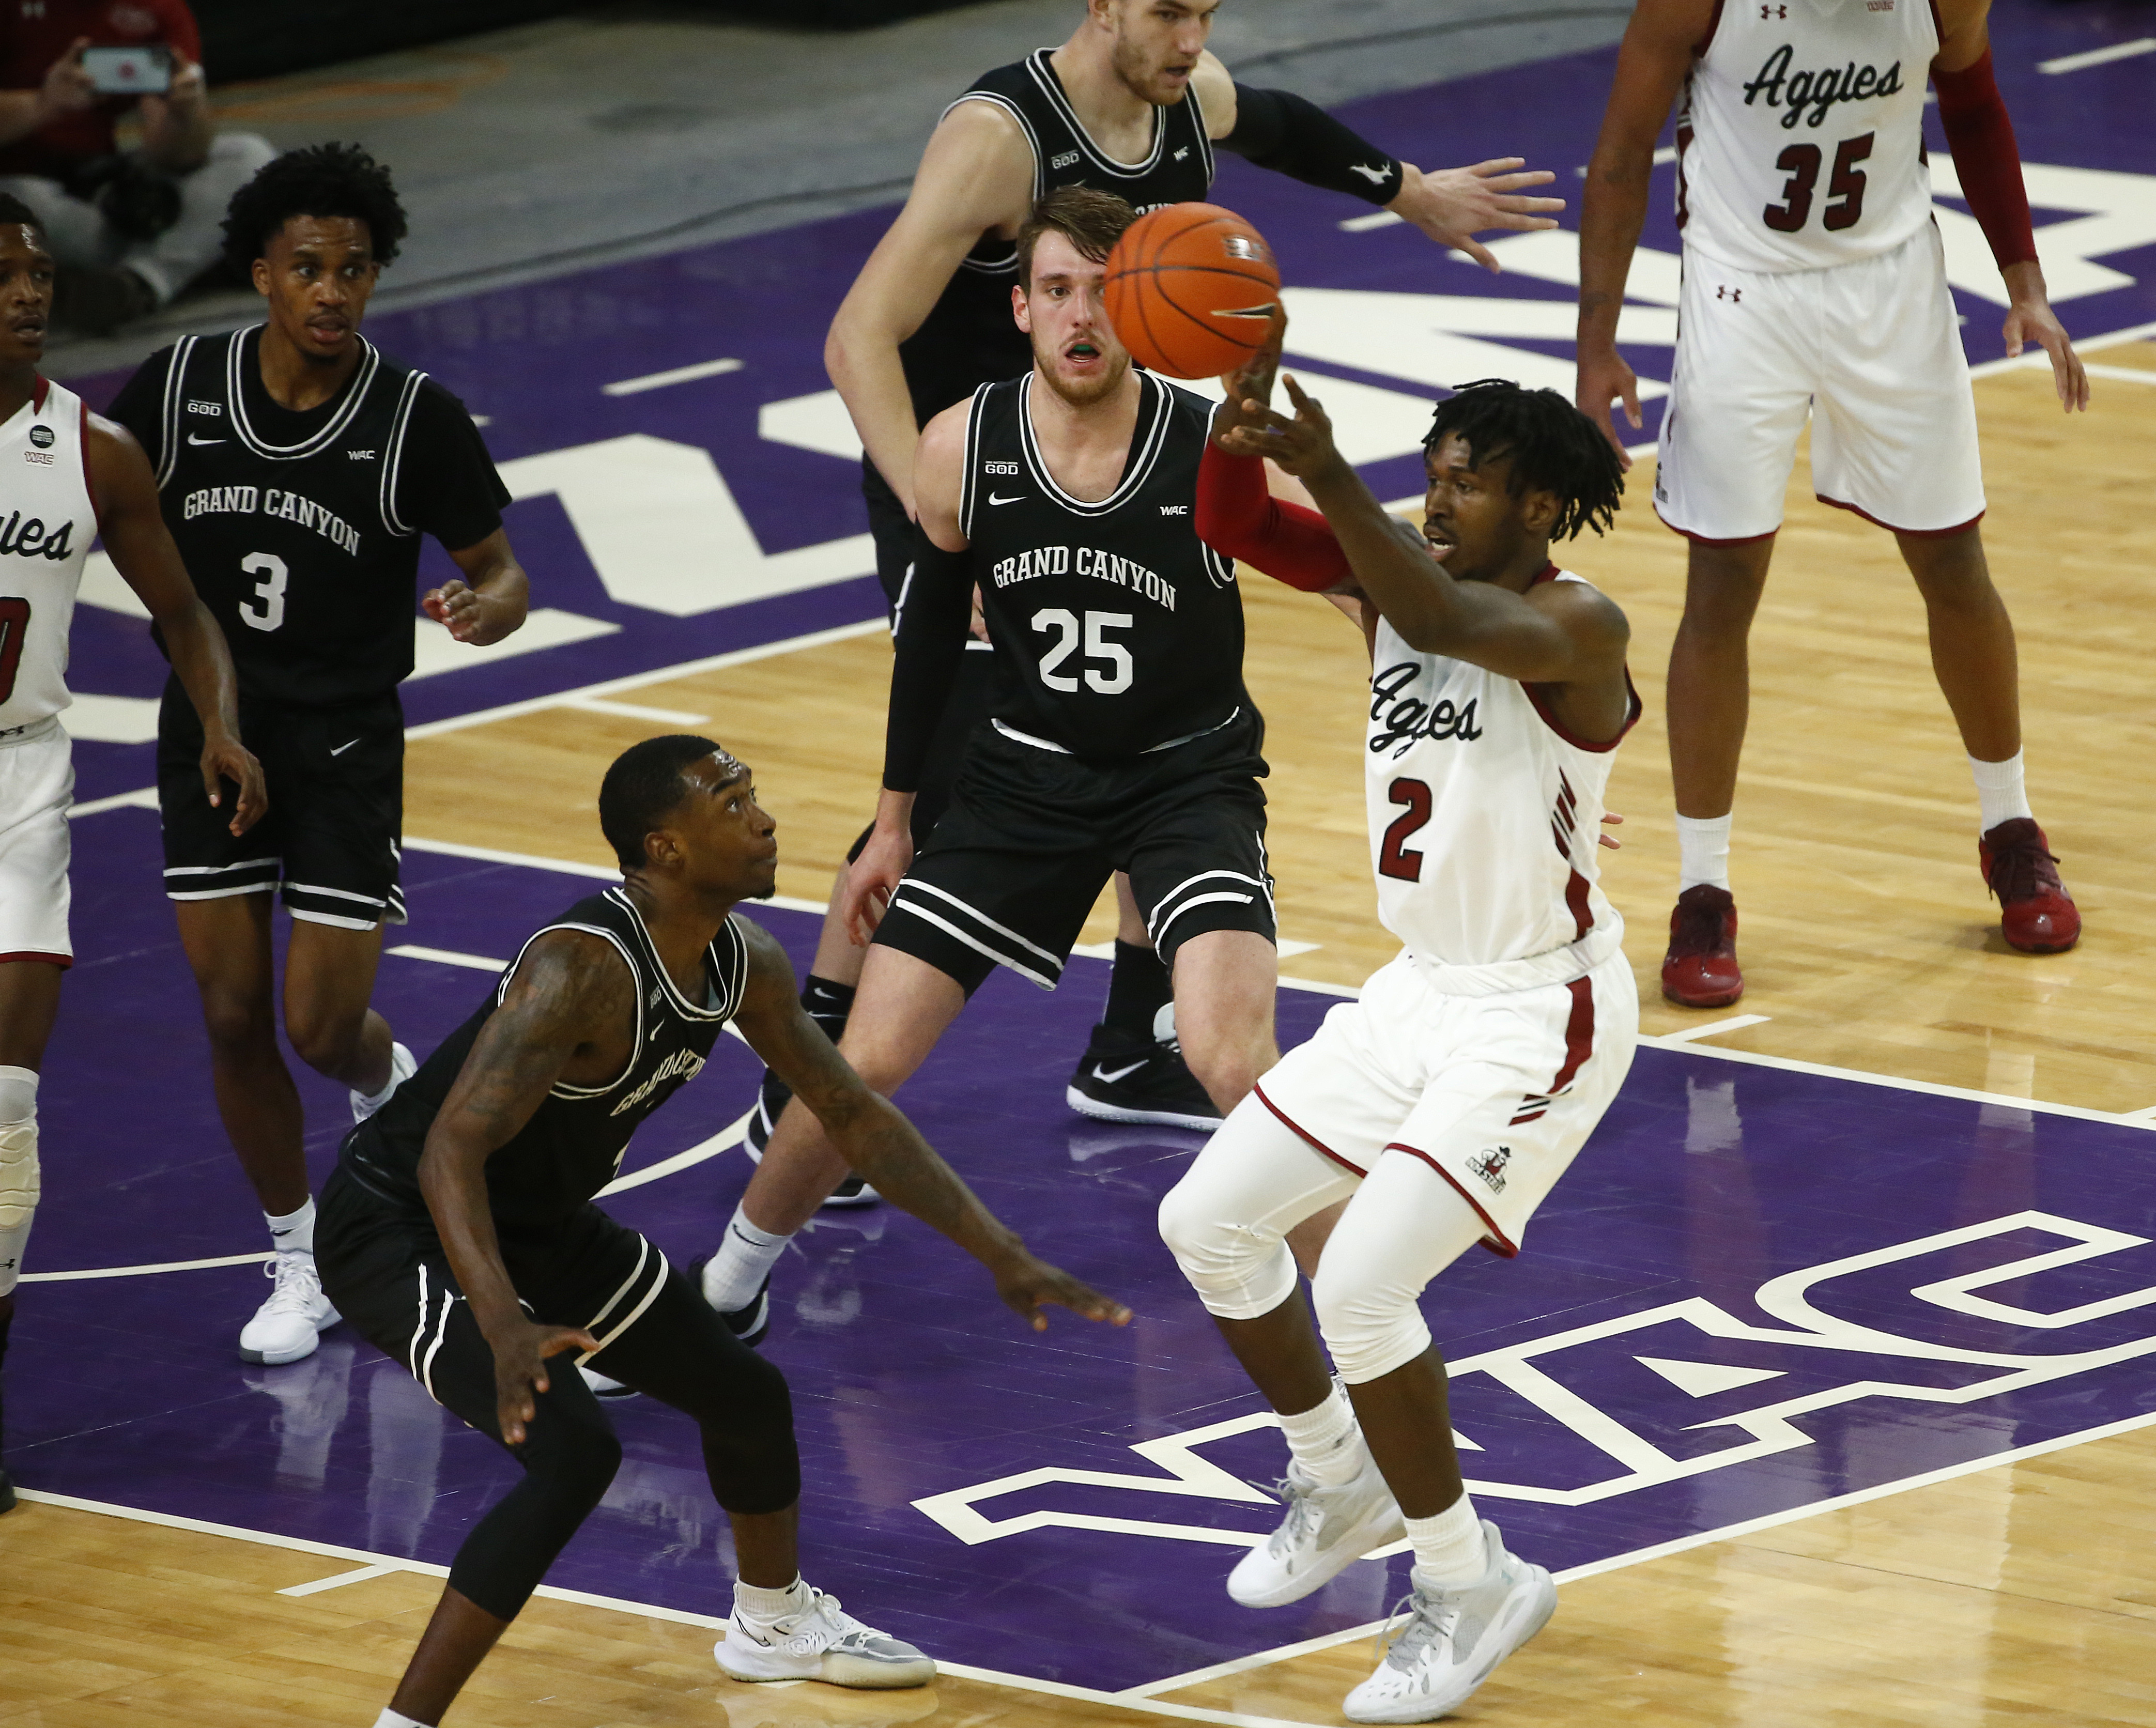 New Mexico State Aggies forward Donnie Tillman passes the ball against Grand Canyon Antelopes forward Oscar Frayer during the second half at GCU Arena.&nbsp;